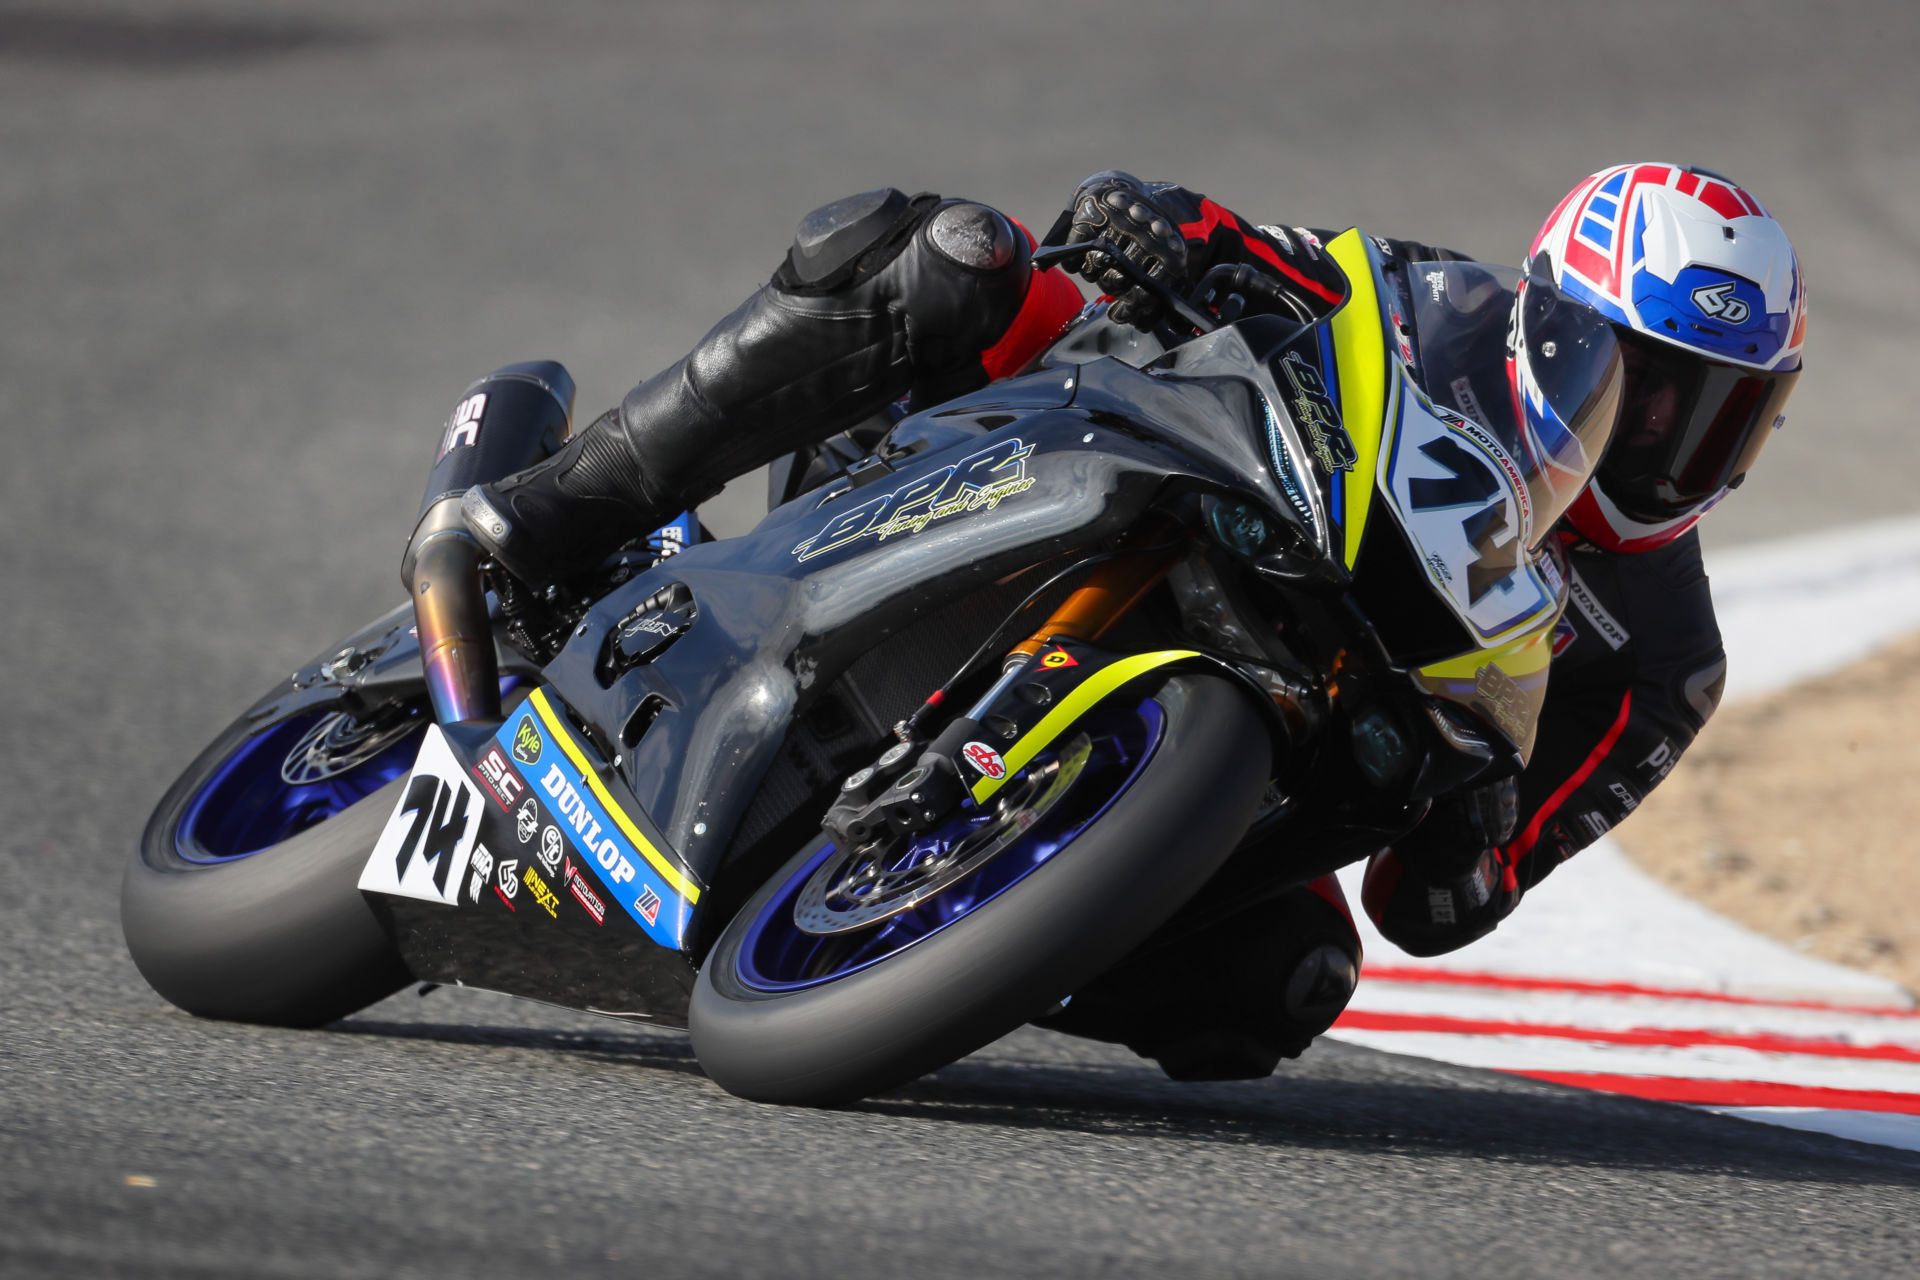 Bryce Prince (74), as seen riding a Yamaha YZF-R6 in MotoAmerica Supersport at Laguna Seca in 2020. Photo by Brian J. Nelson.